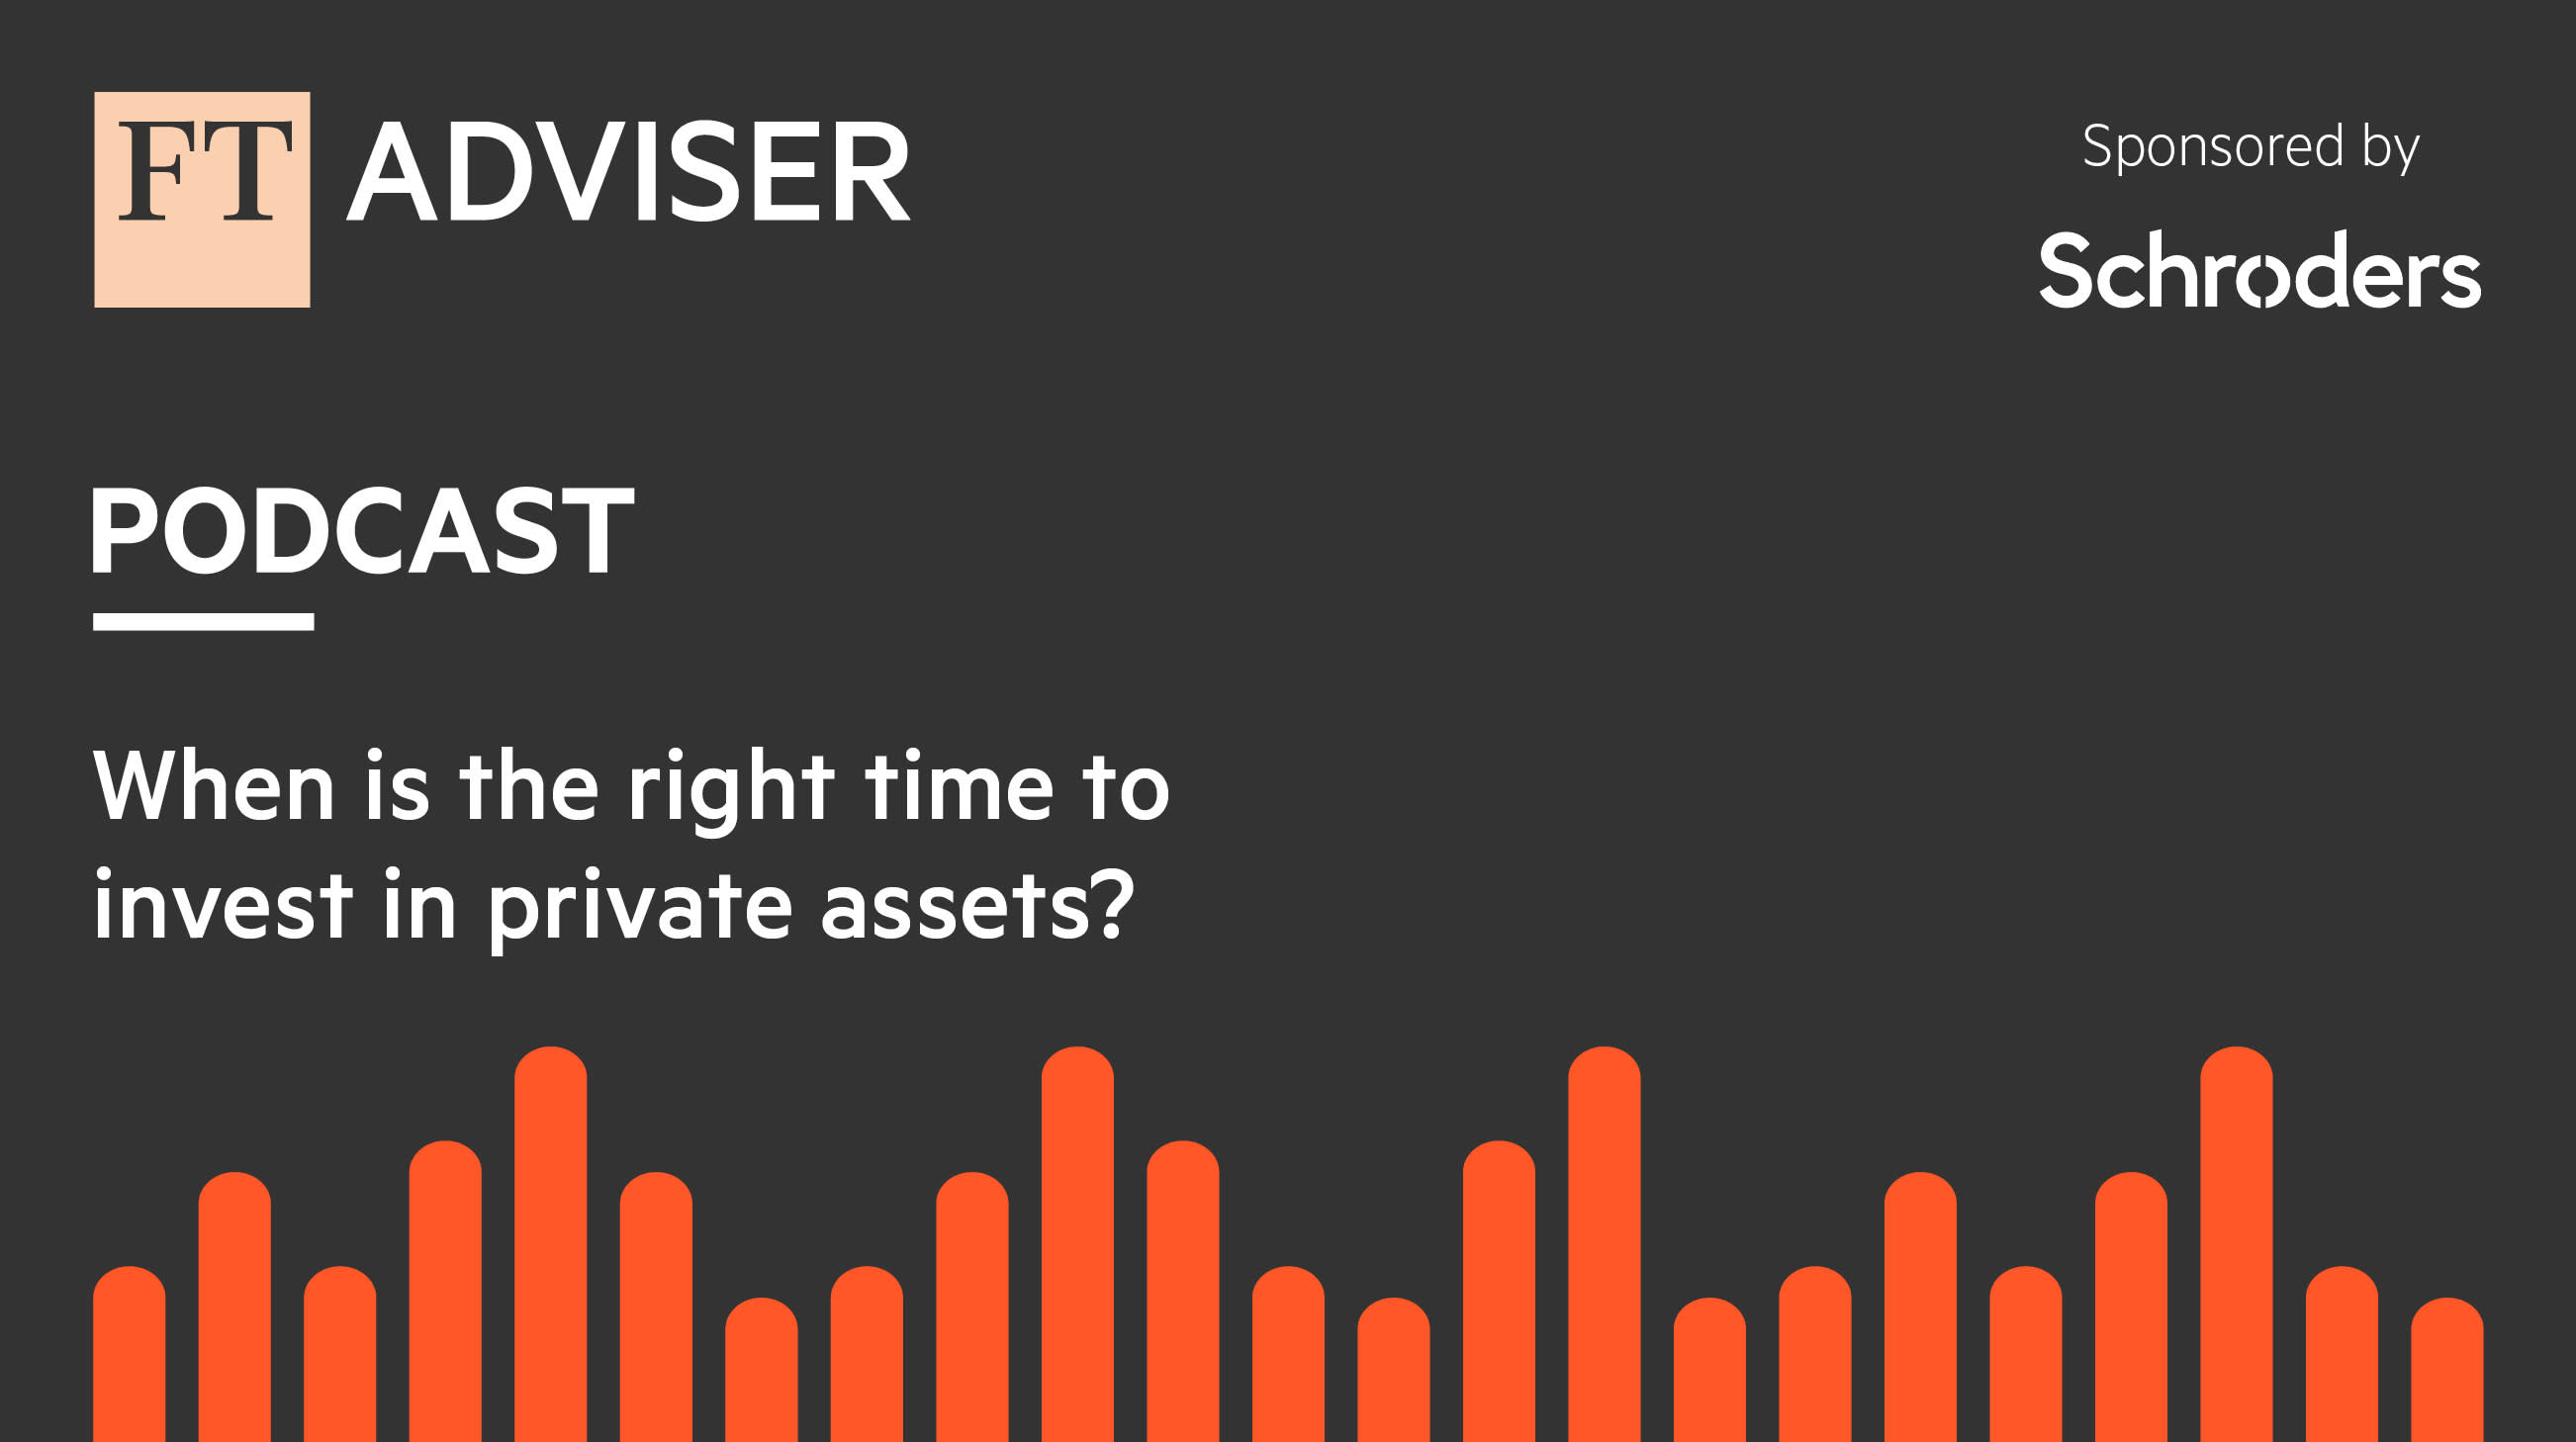 When is the right time to invest in private assets?